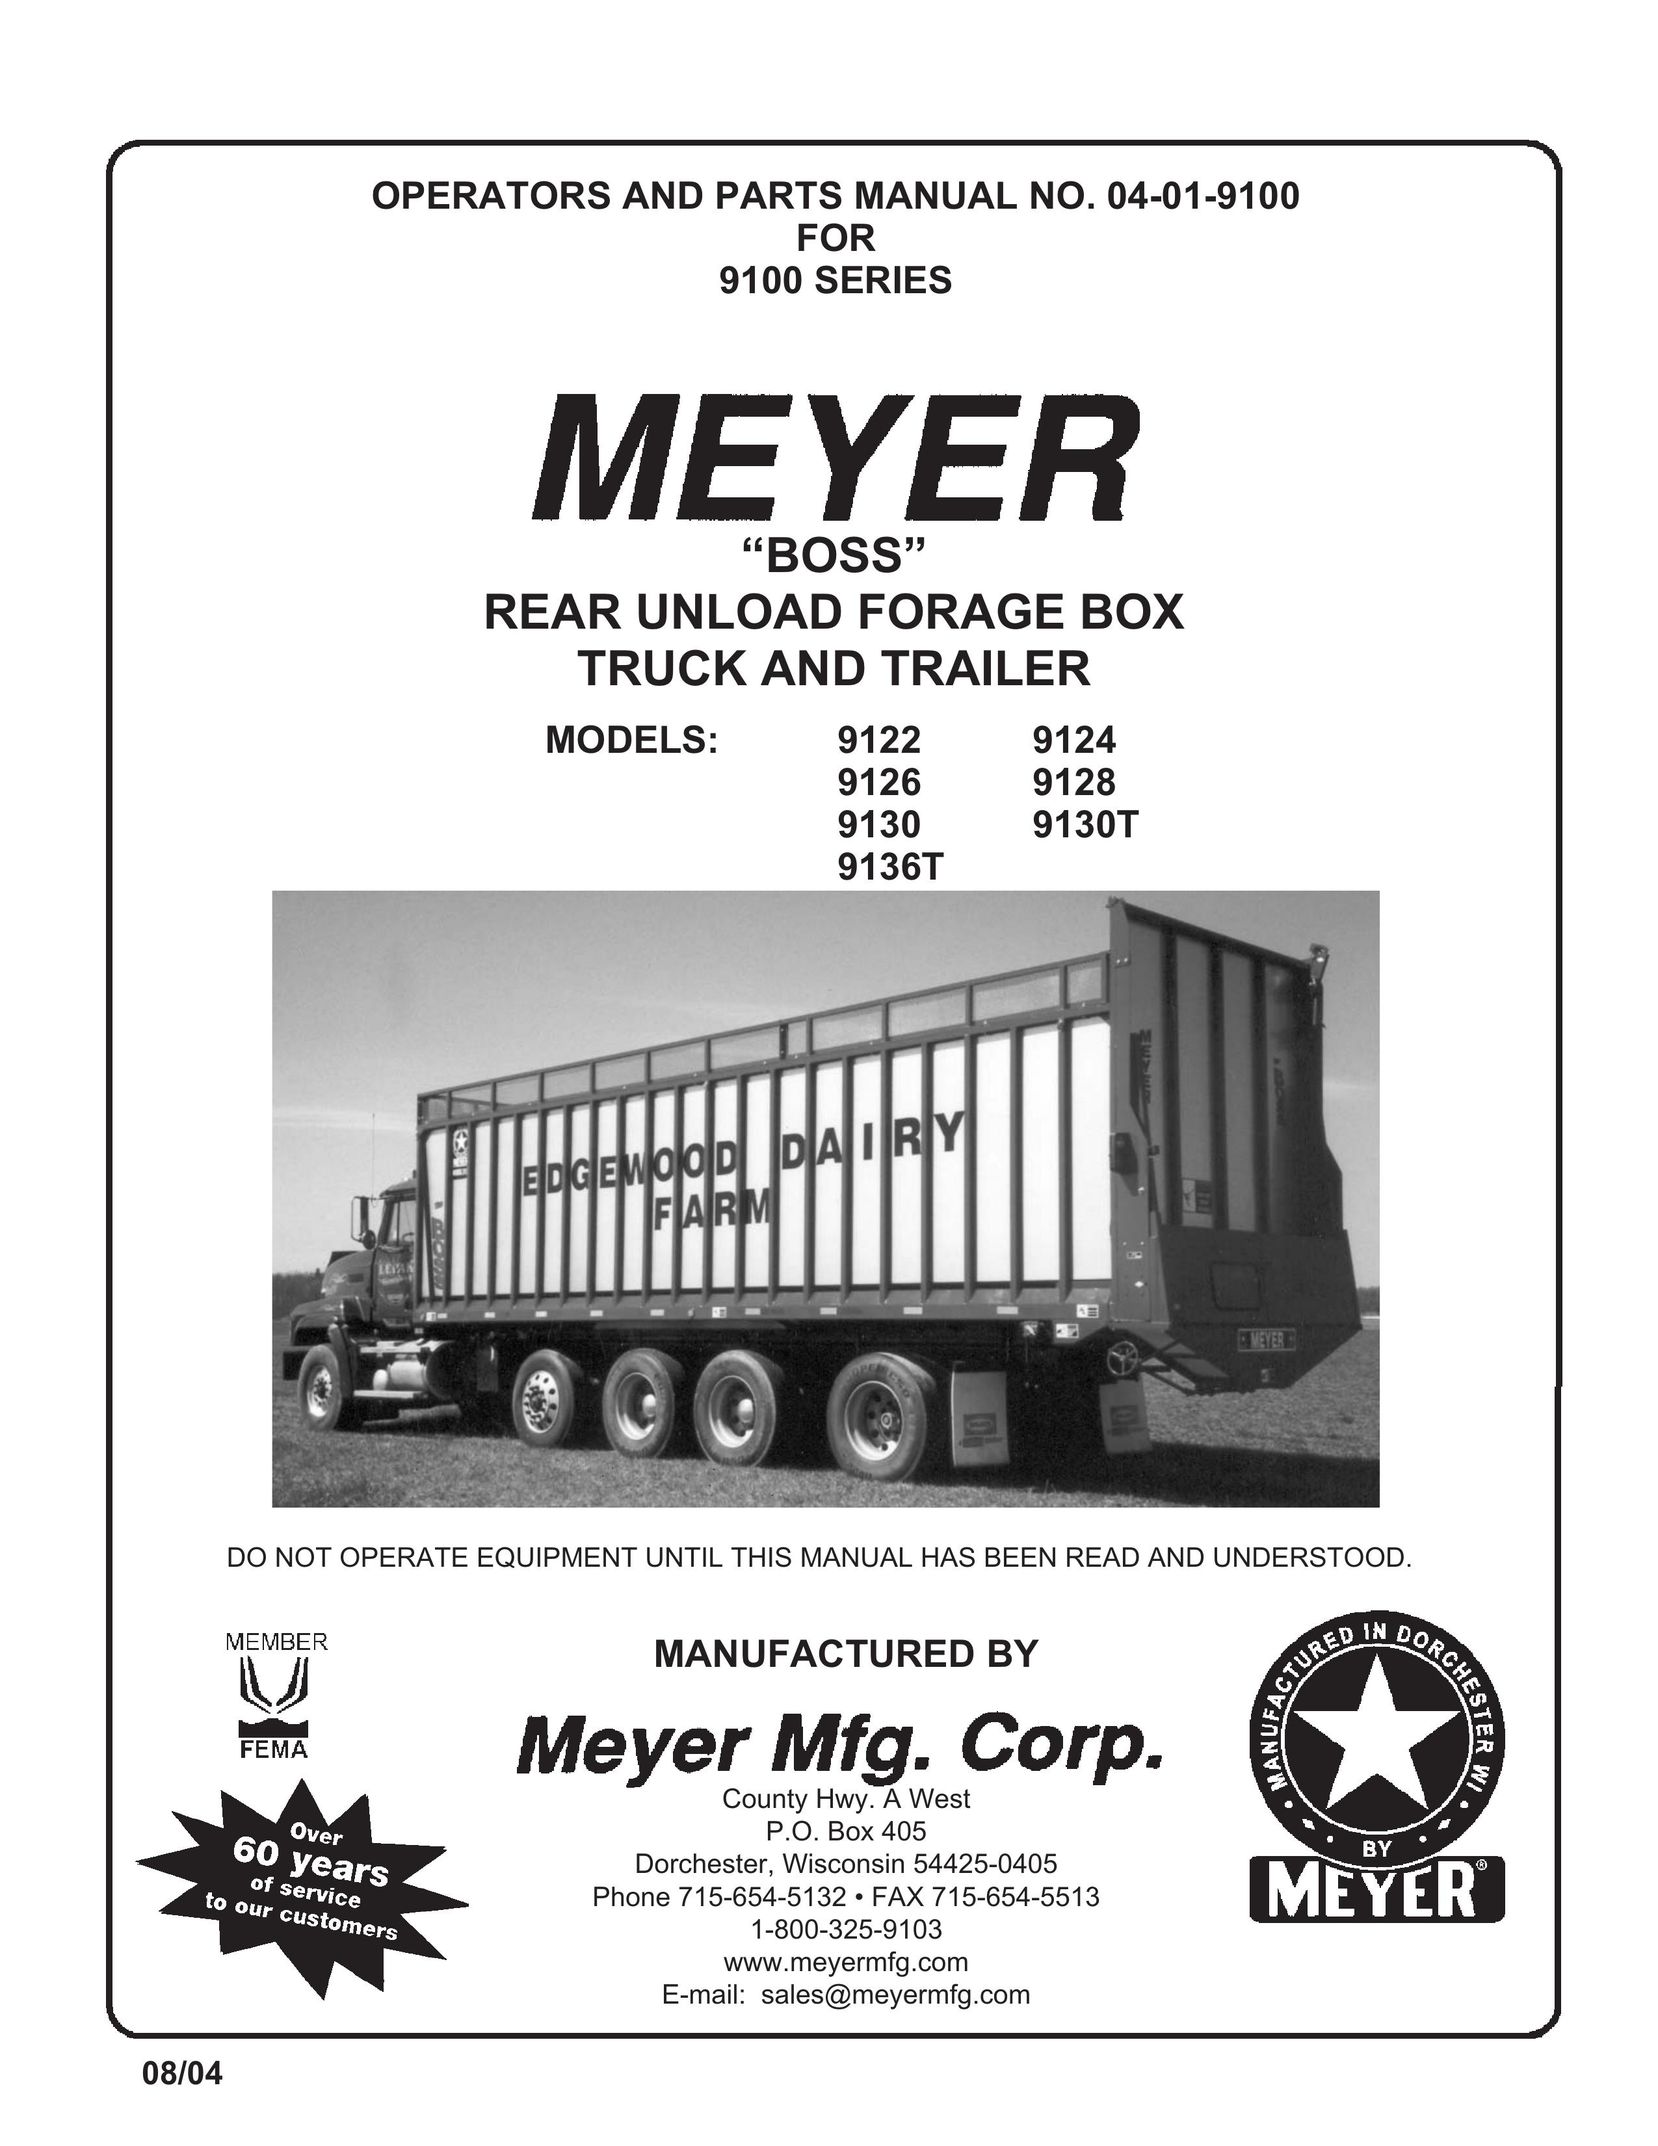 Meyer "Boss" Rear Unload Forage Box Truck and Trailer Musical Toy Instrument User Manual